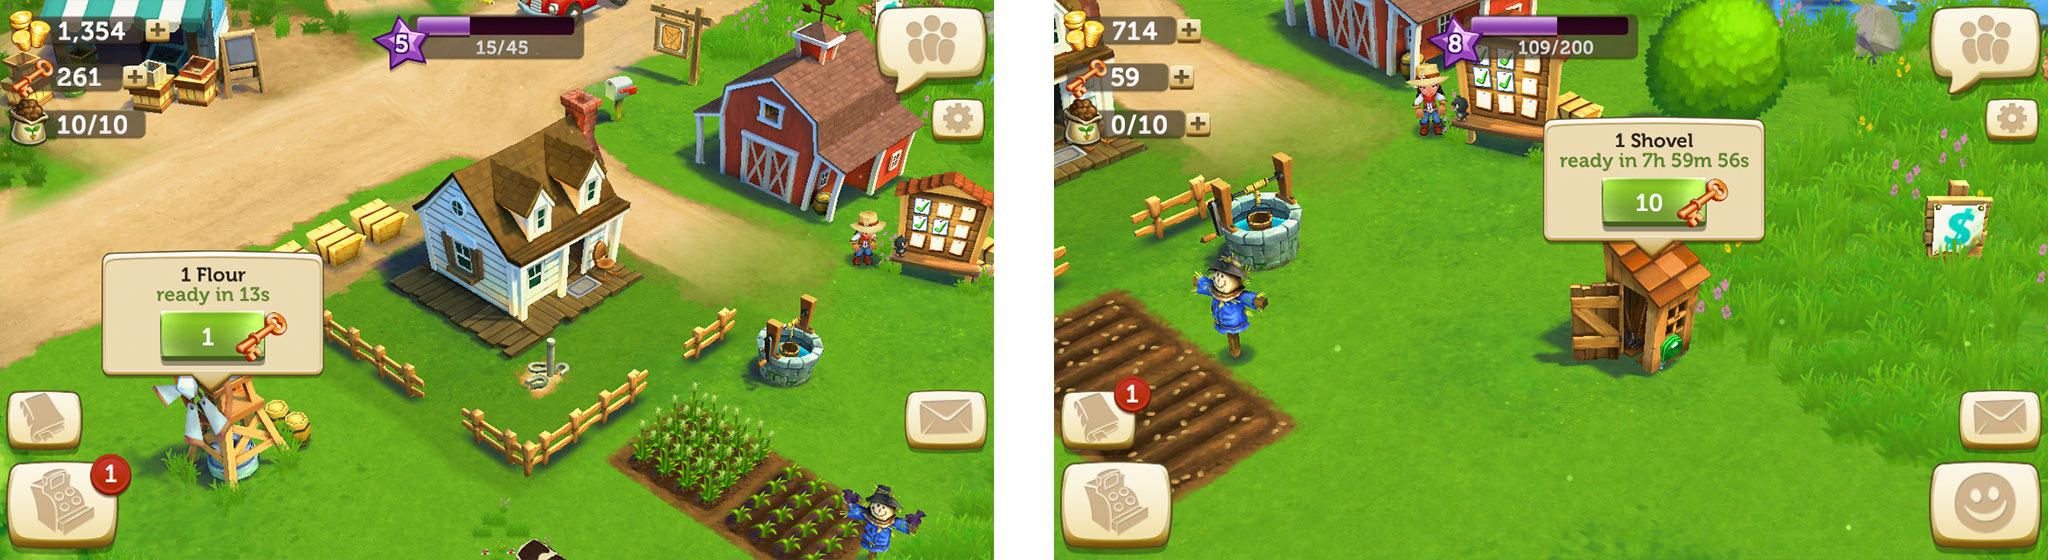 easy way to make cash on farmville